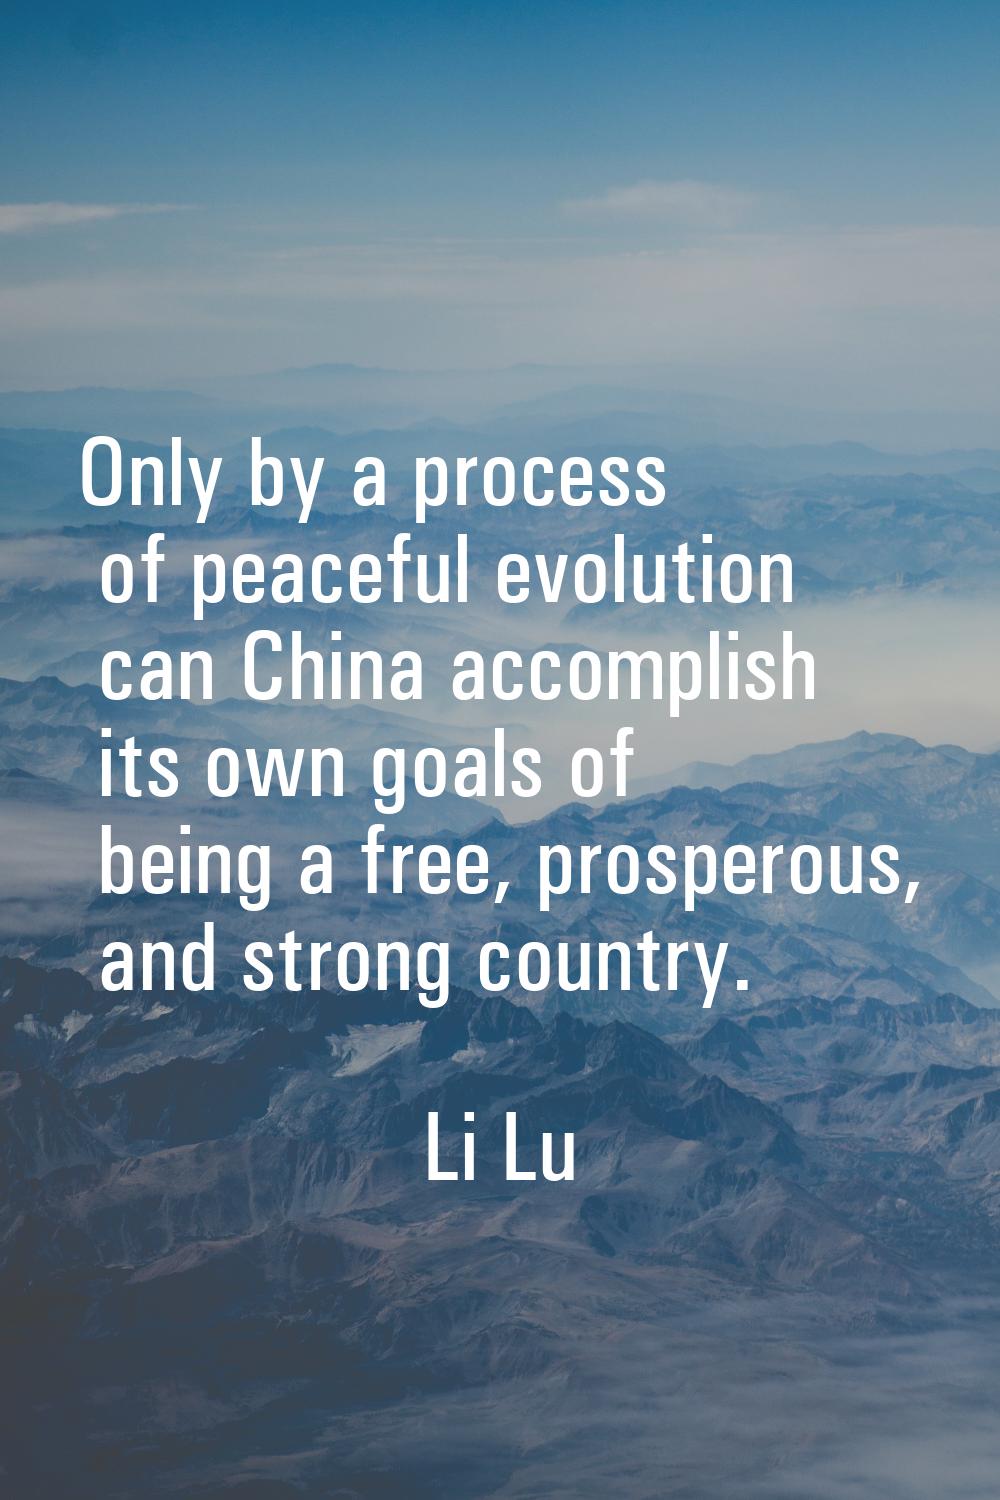 Only by a process of peaceful evolution can China accomplish its own goals of being a free, prosper